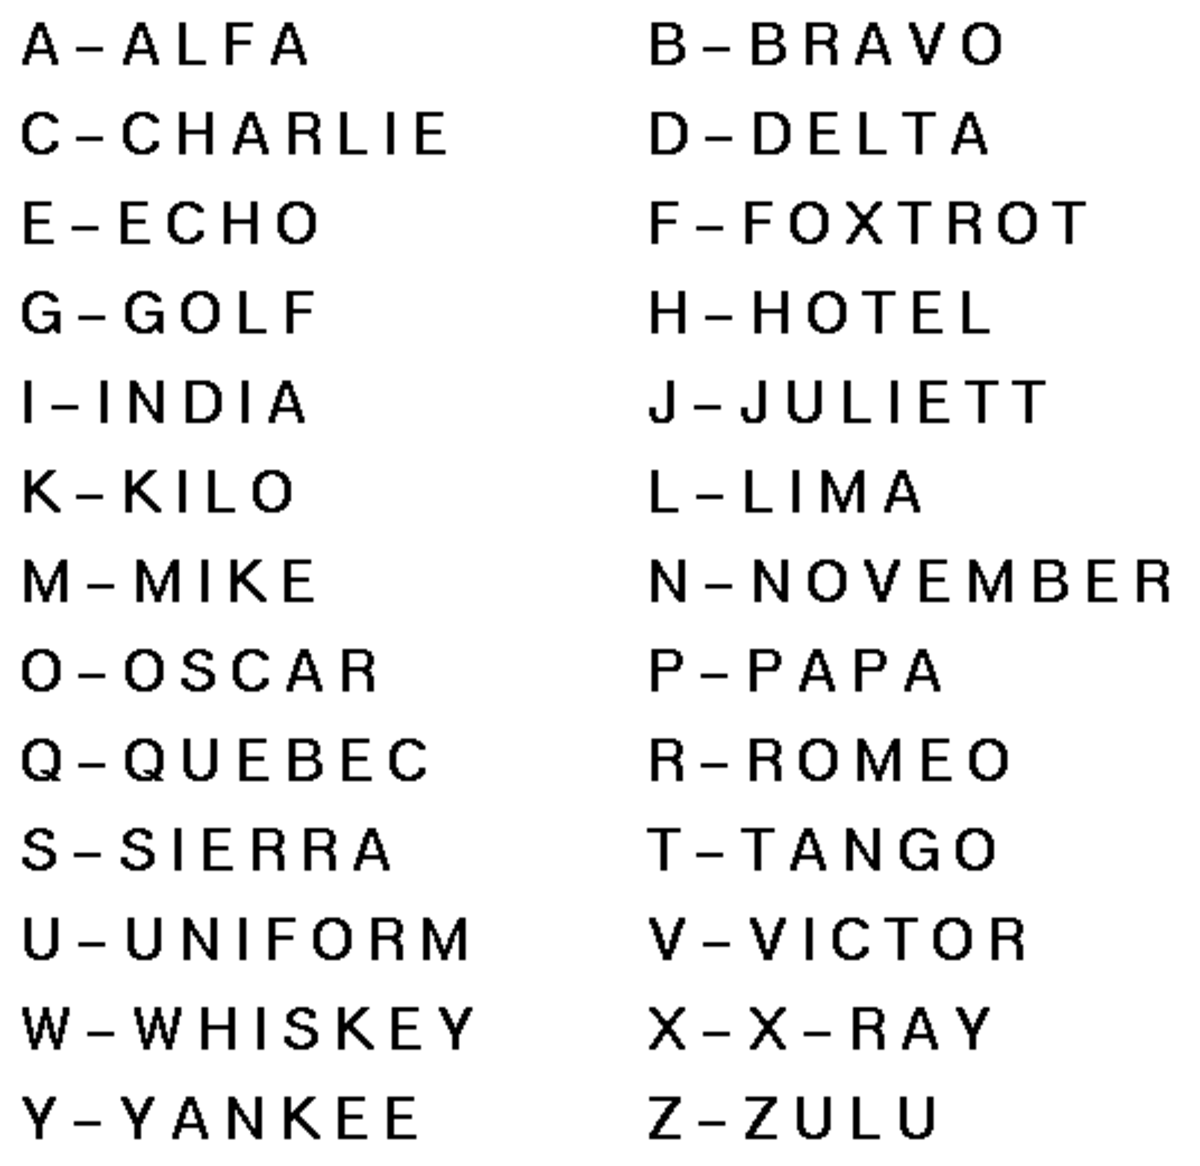 What is the Military, Police or NATO Phonetic Alphabet?